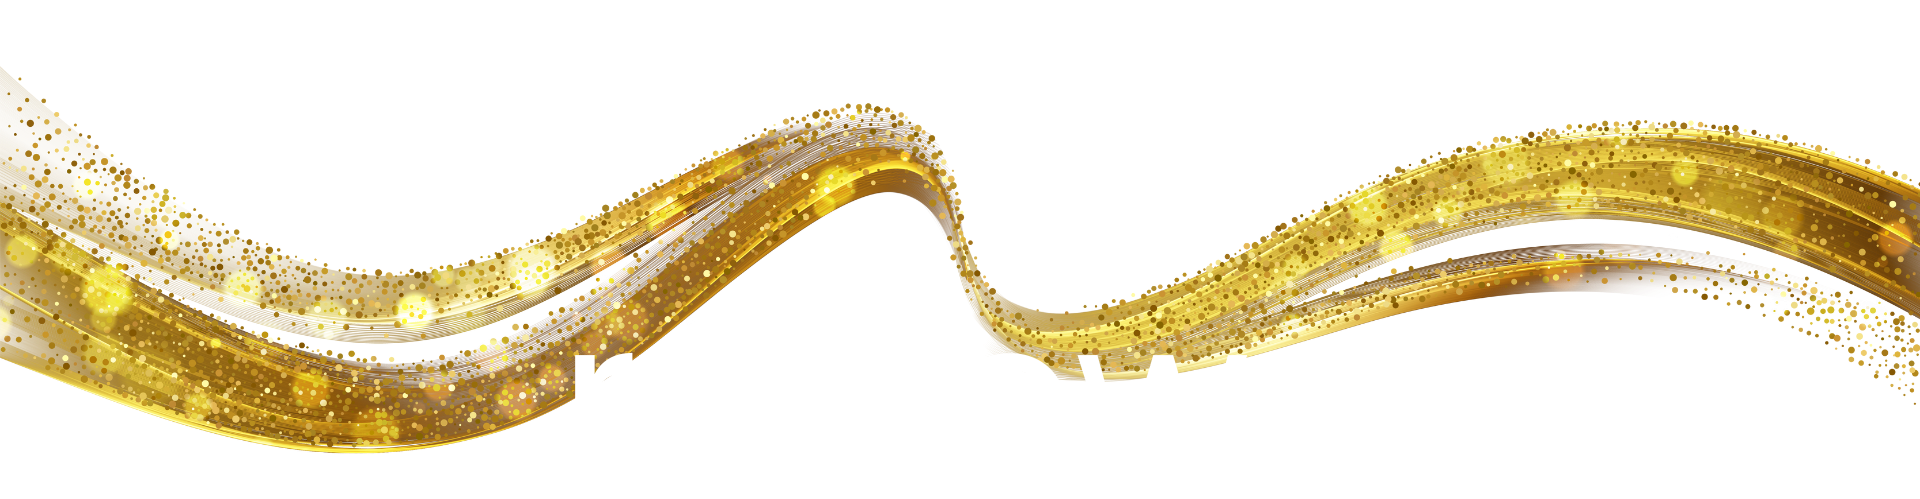 Reviews & Testimonials text with golden swirly graphics in the background overlaying a picture of a woman getting a massage - UNIQUE DESIGN! 